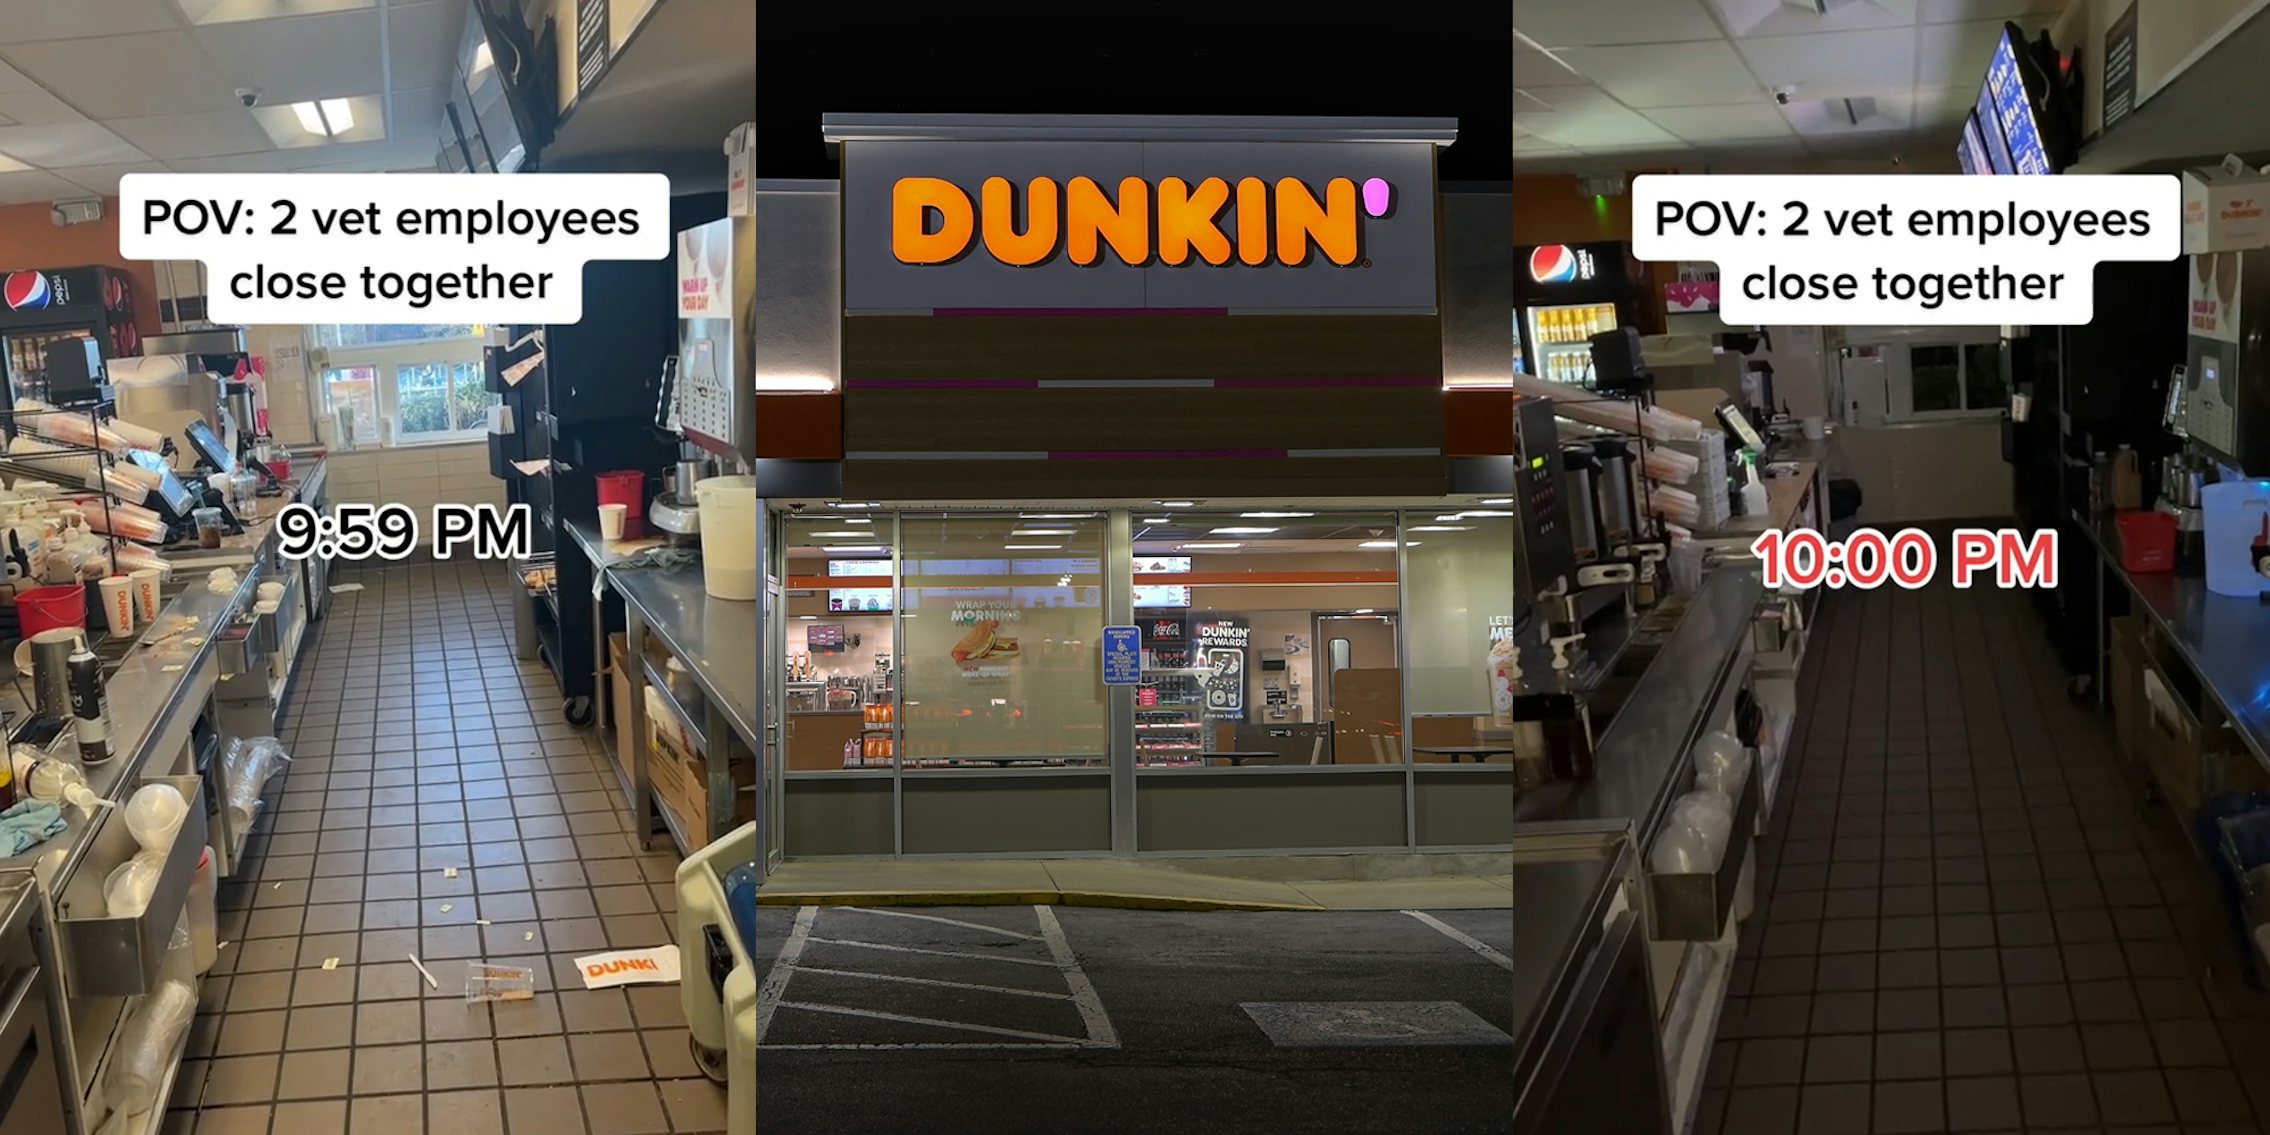 Dunkin' interior with wrappers on floor with caption 'POV: 2 vet employees close together' '9:59PM' (l) Dunkin' building with sign at night (c) Dunkin' interior with caption 'POV: 2 vet employees close together' '10:00PM' (r)